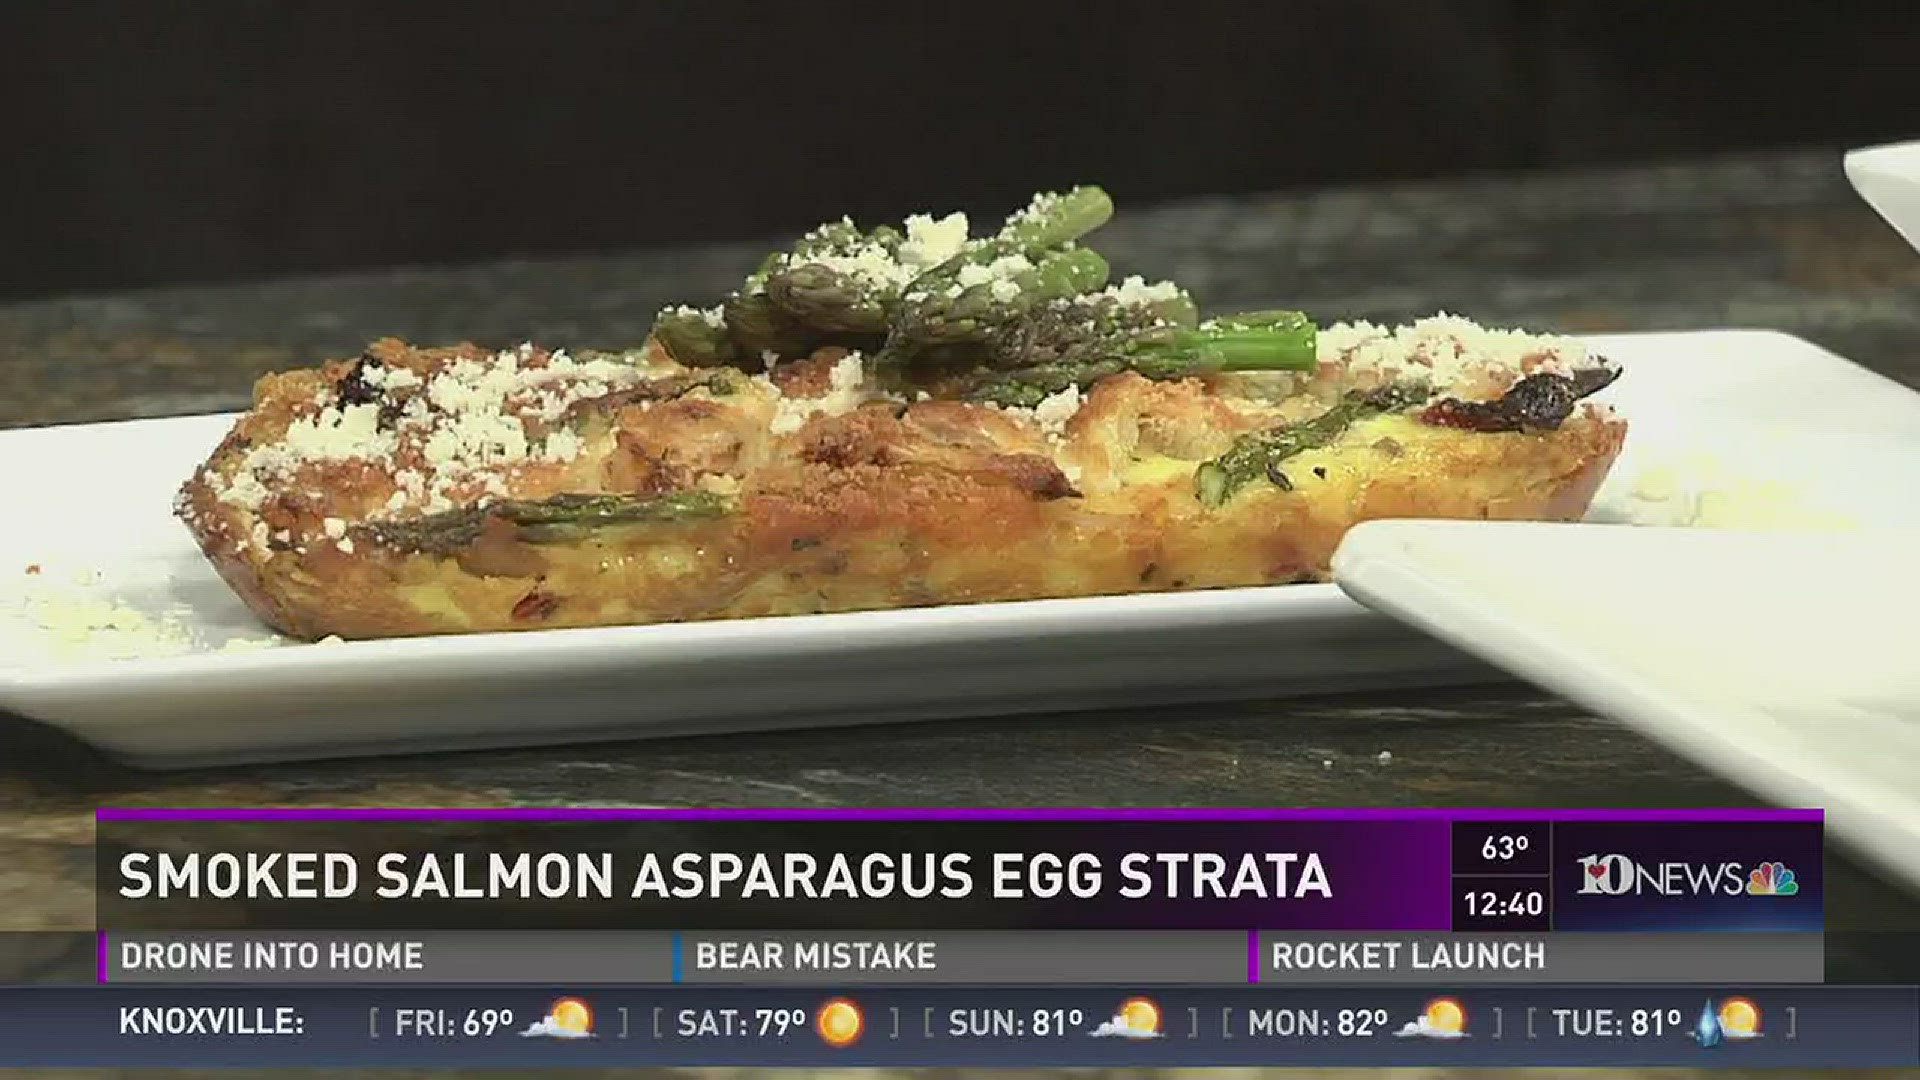 Chef Gary Nicely from Naples Italian shows us how to make smoked salmon asparagus egg strata.